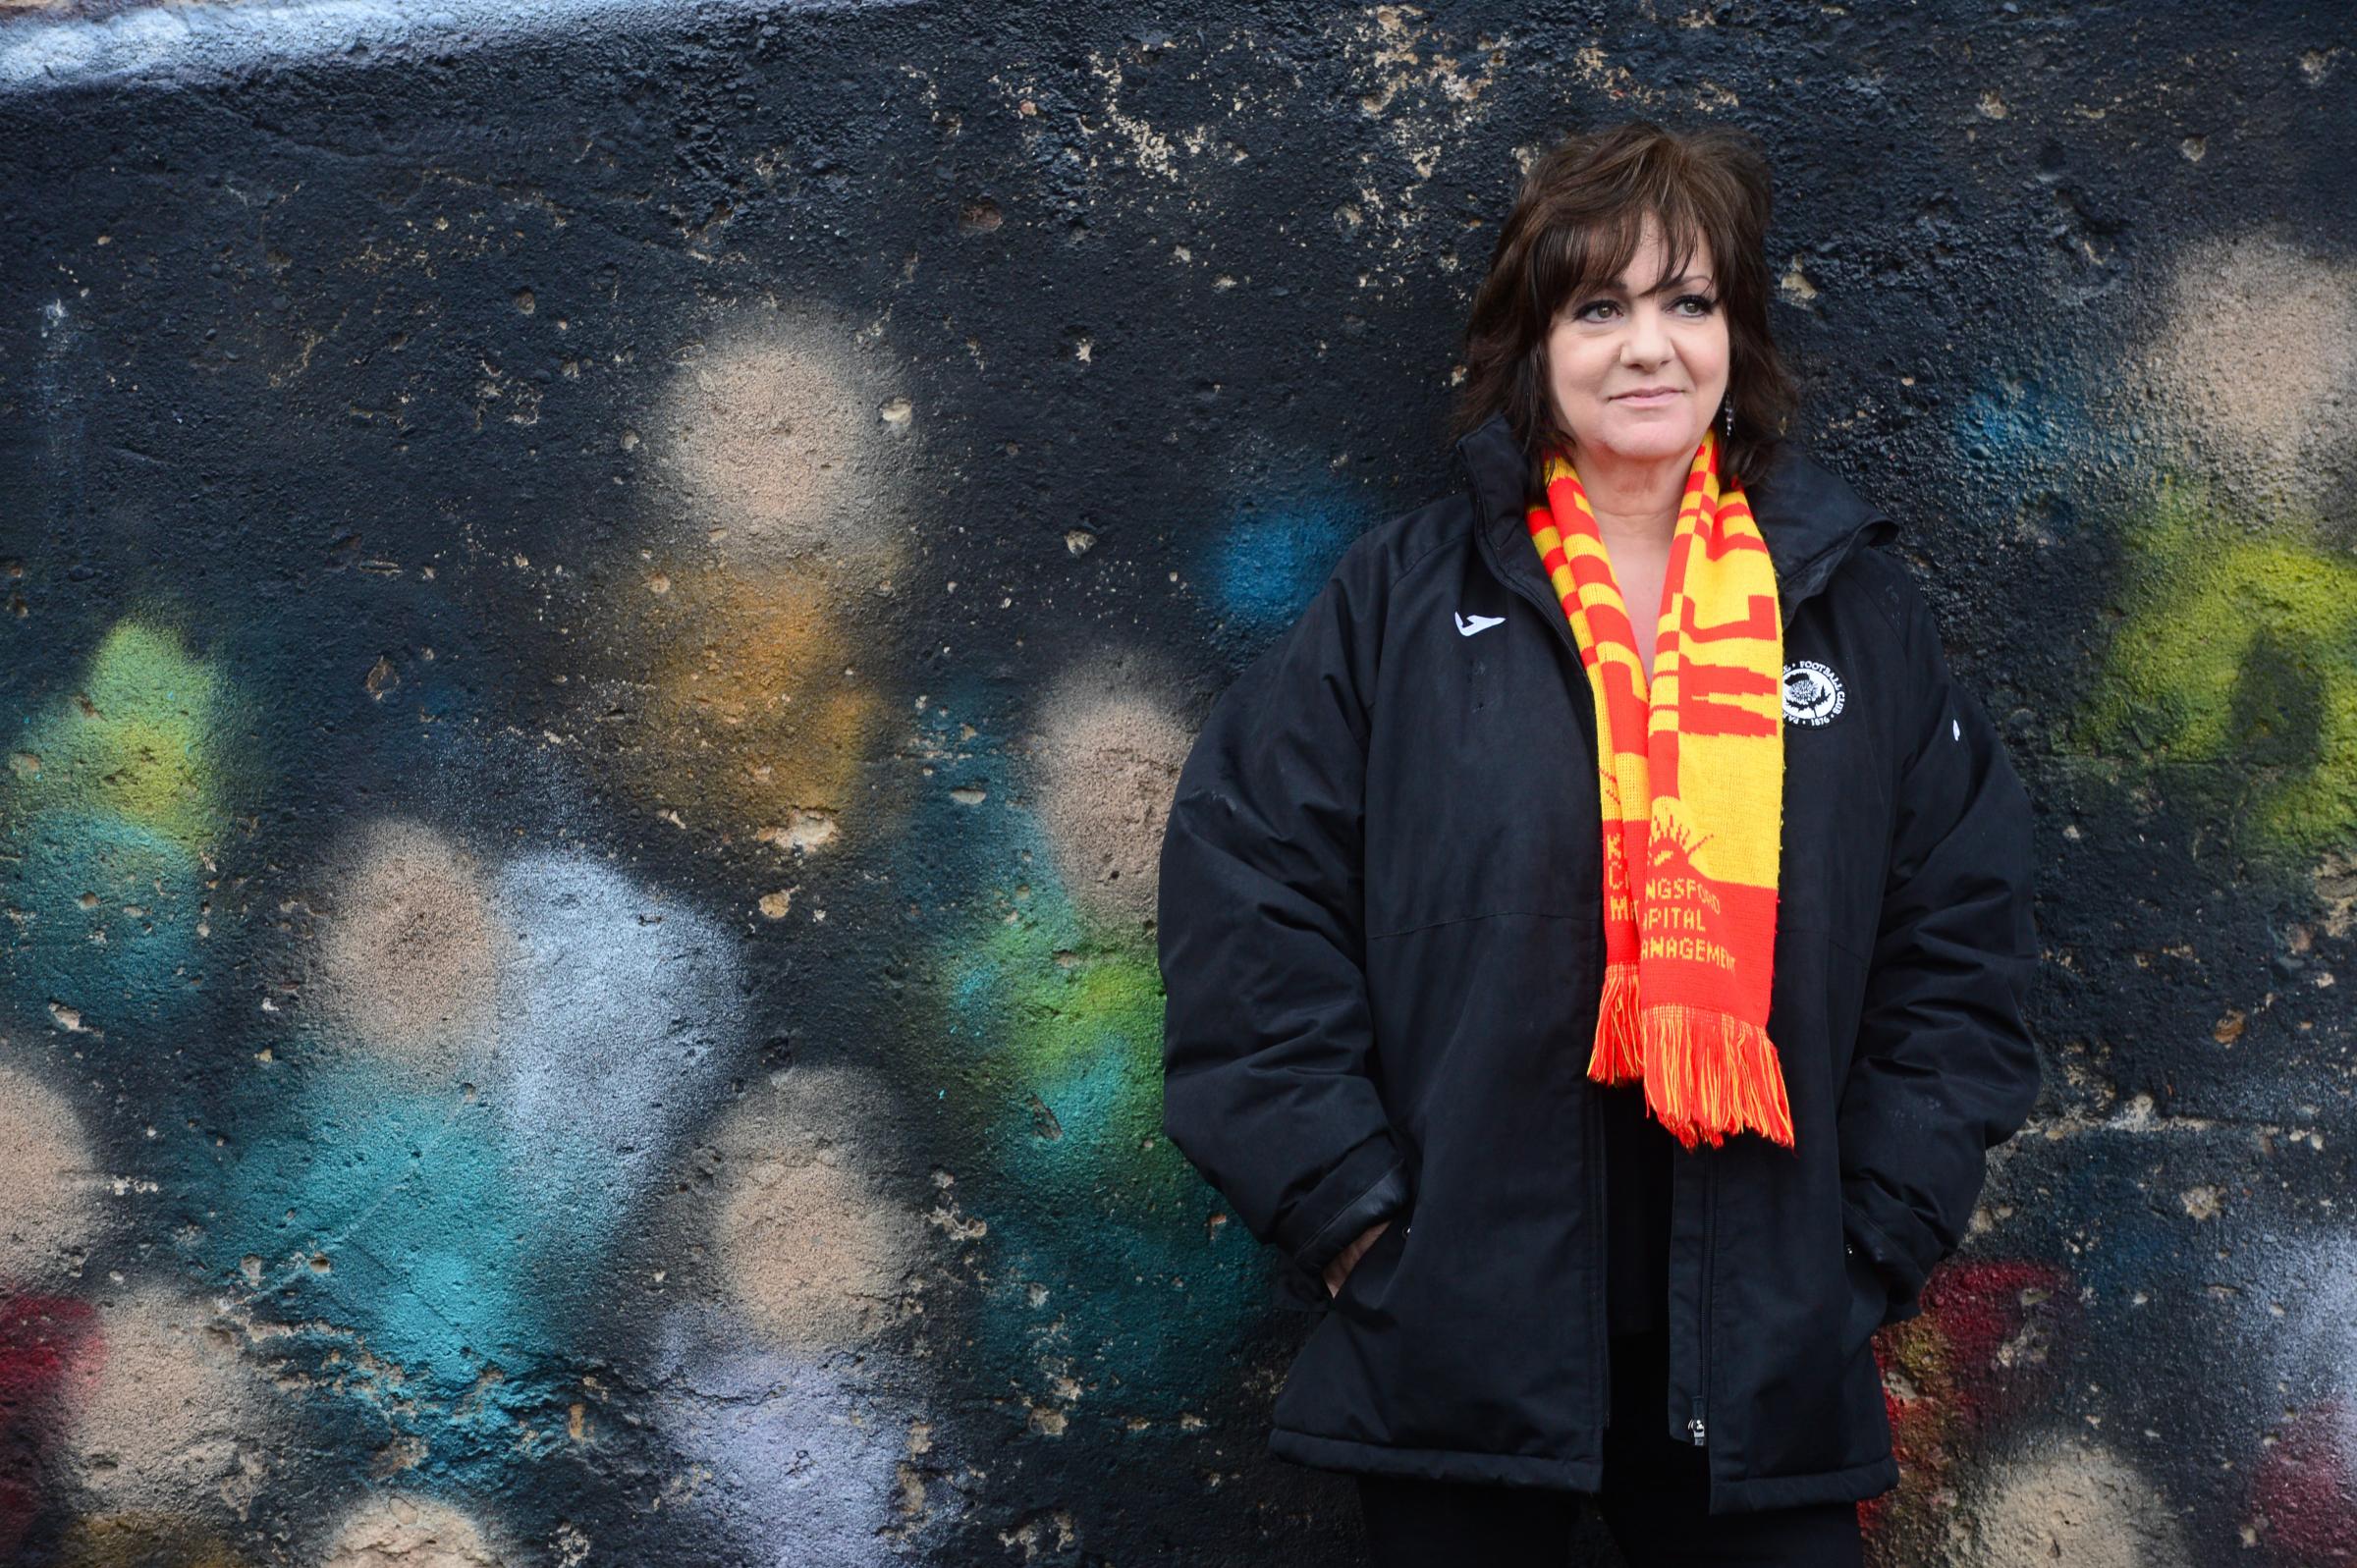 Coronavirus: Partick Thistle chairman Jacqui Low vows all staff will be paid in full